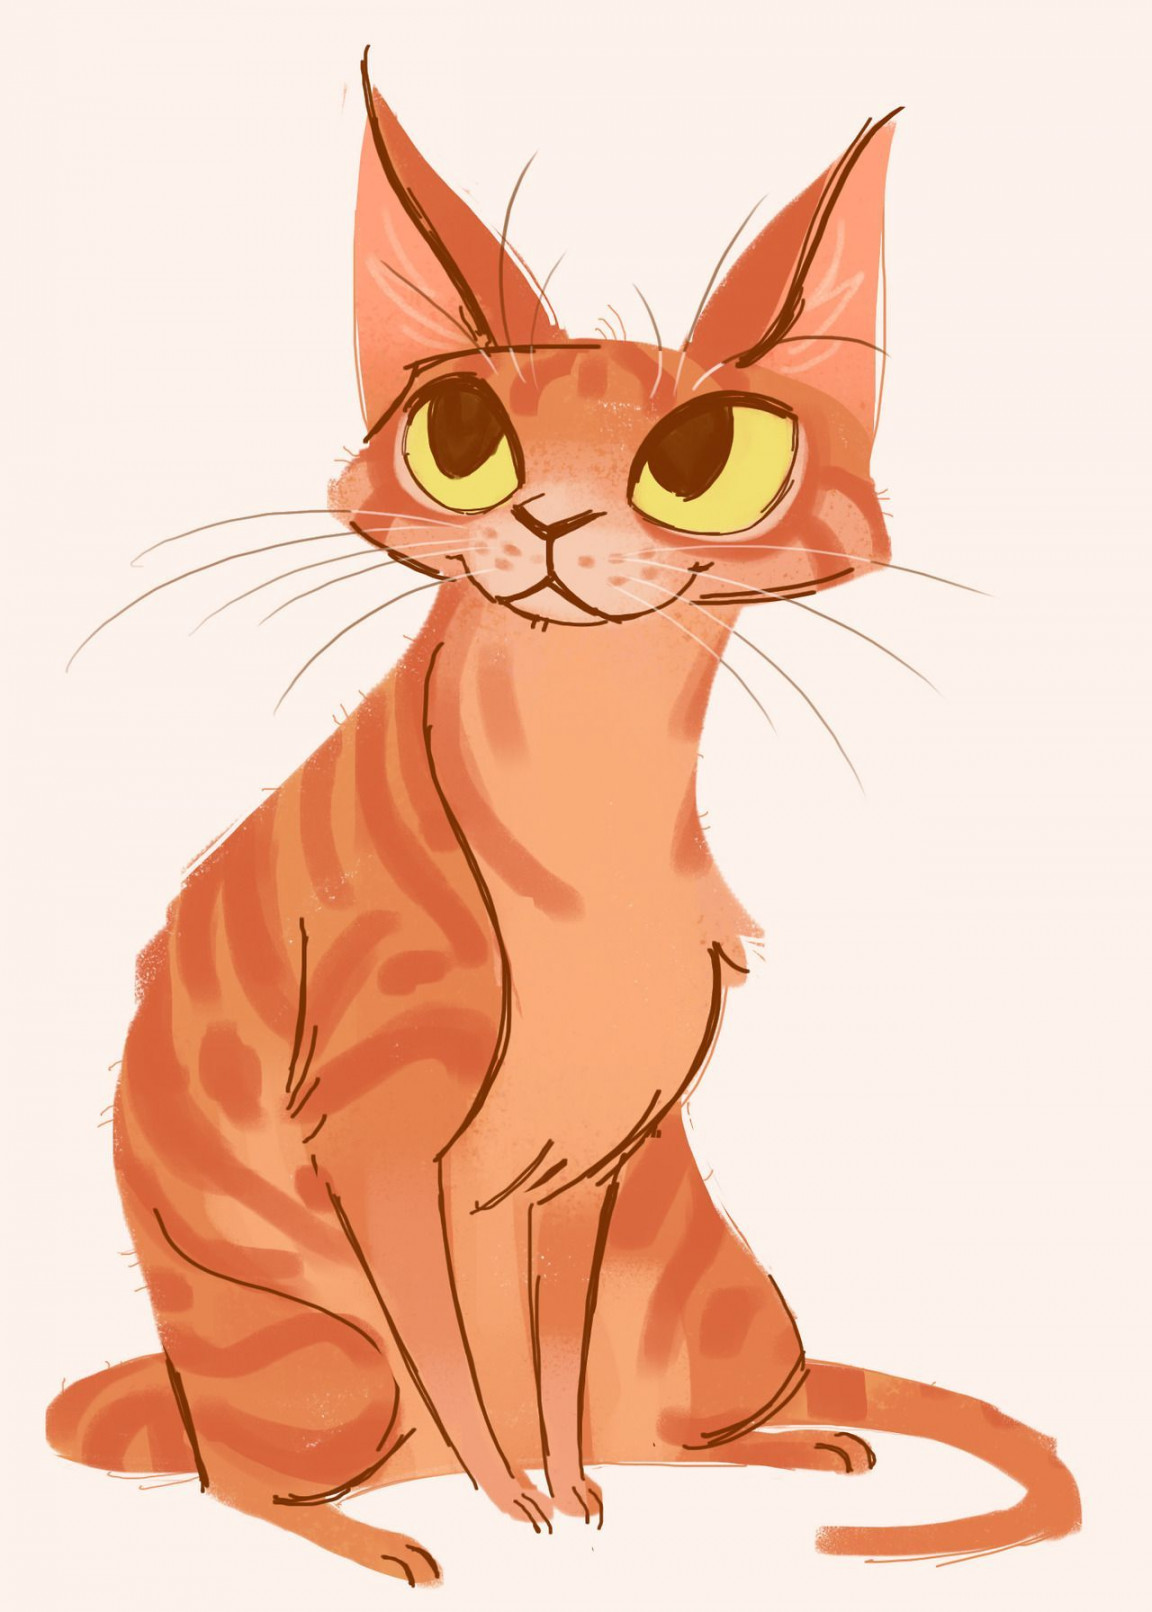 One of the many awesome digital sketches on Daily Cat Drawings